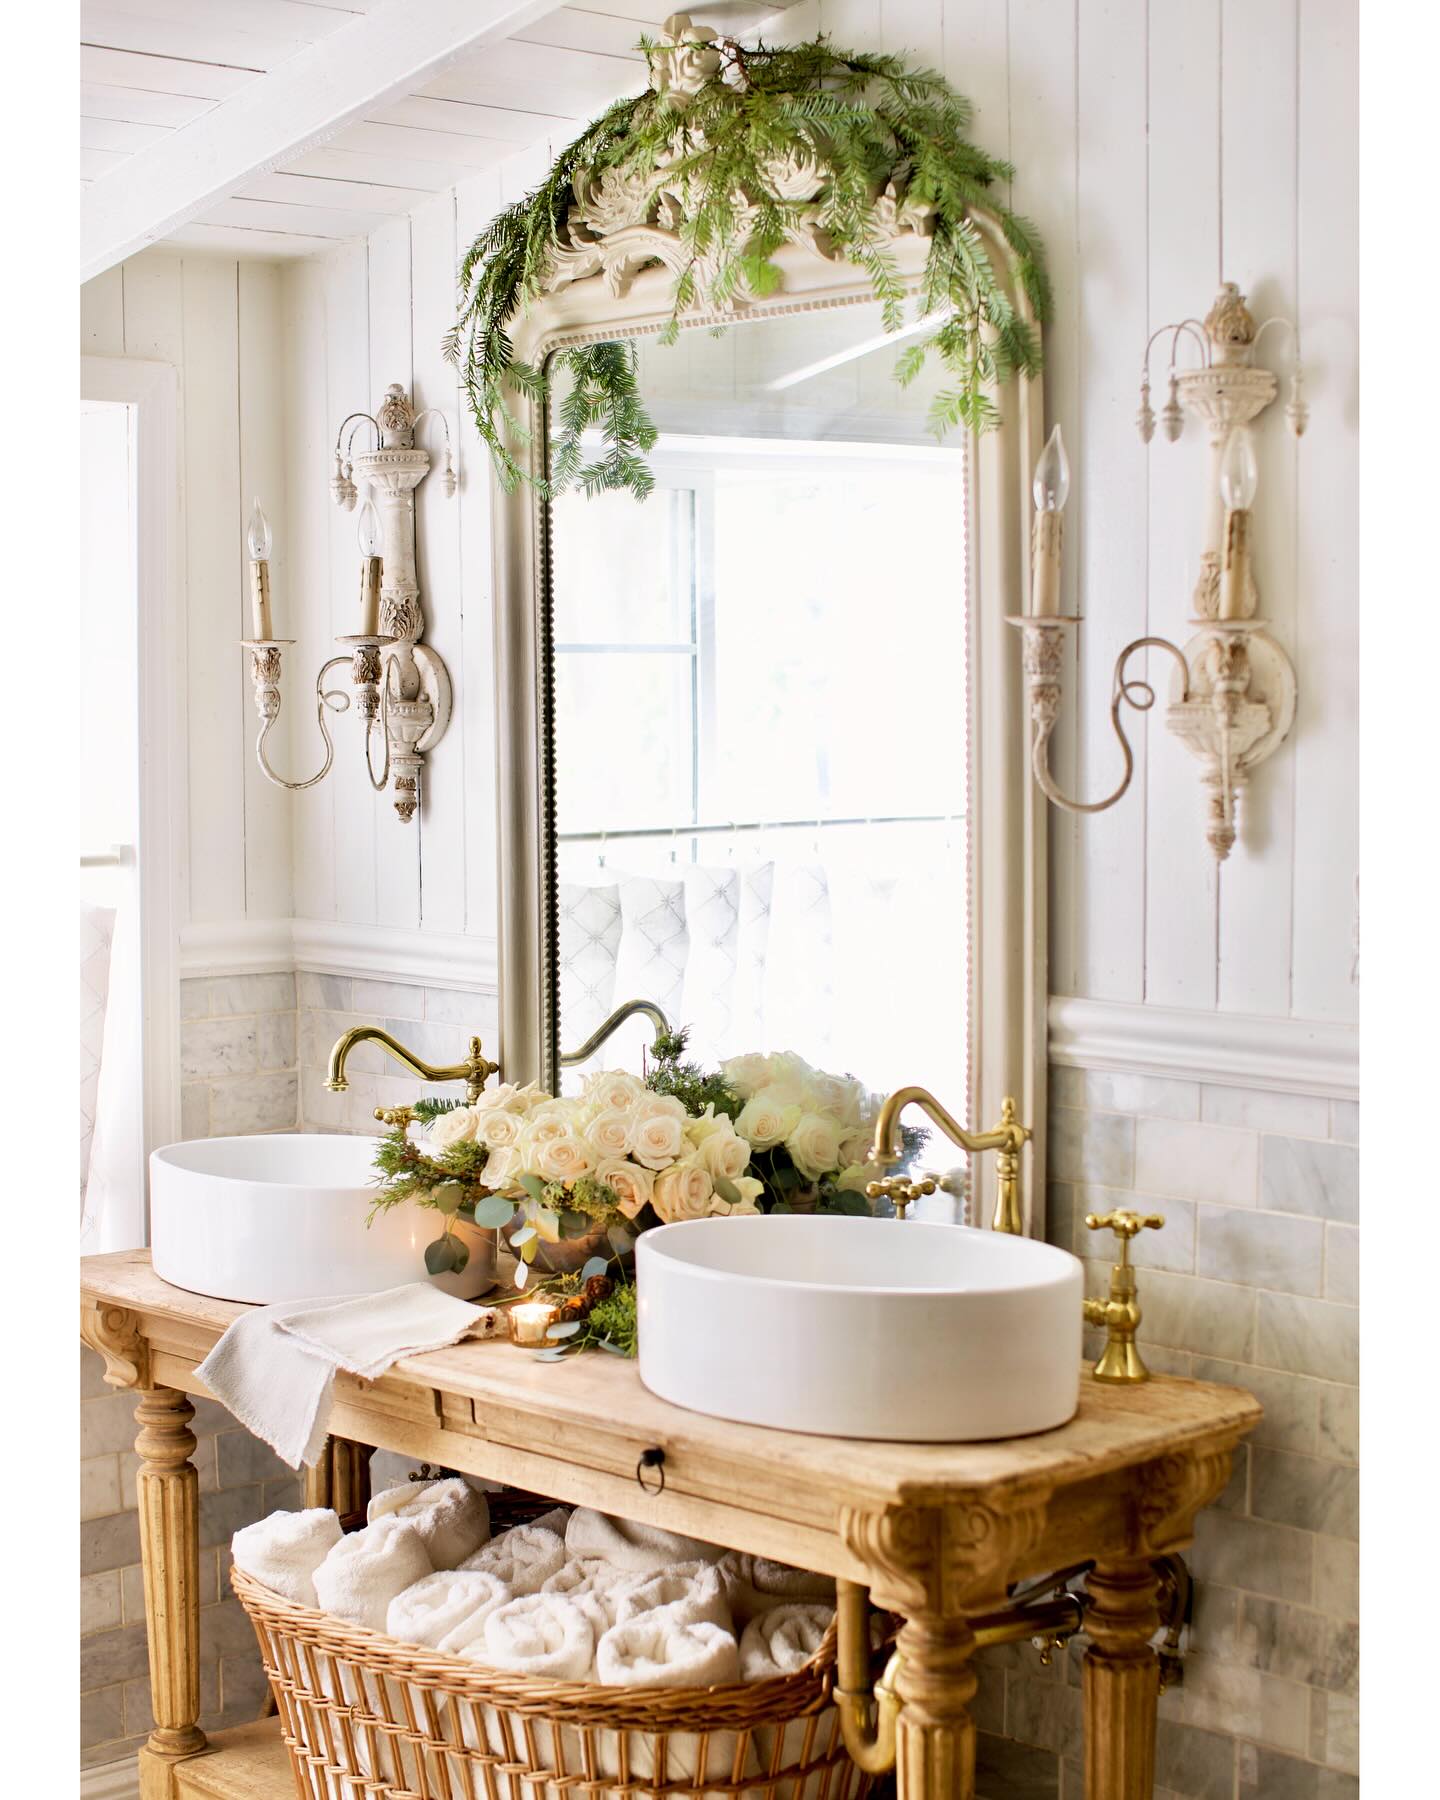 a double vanity with gold faucets in a bathroom with french style decor including wall sconces and a framed mirror is uplifting and ideal for a relaxed bathroom look